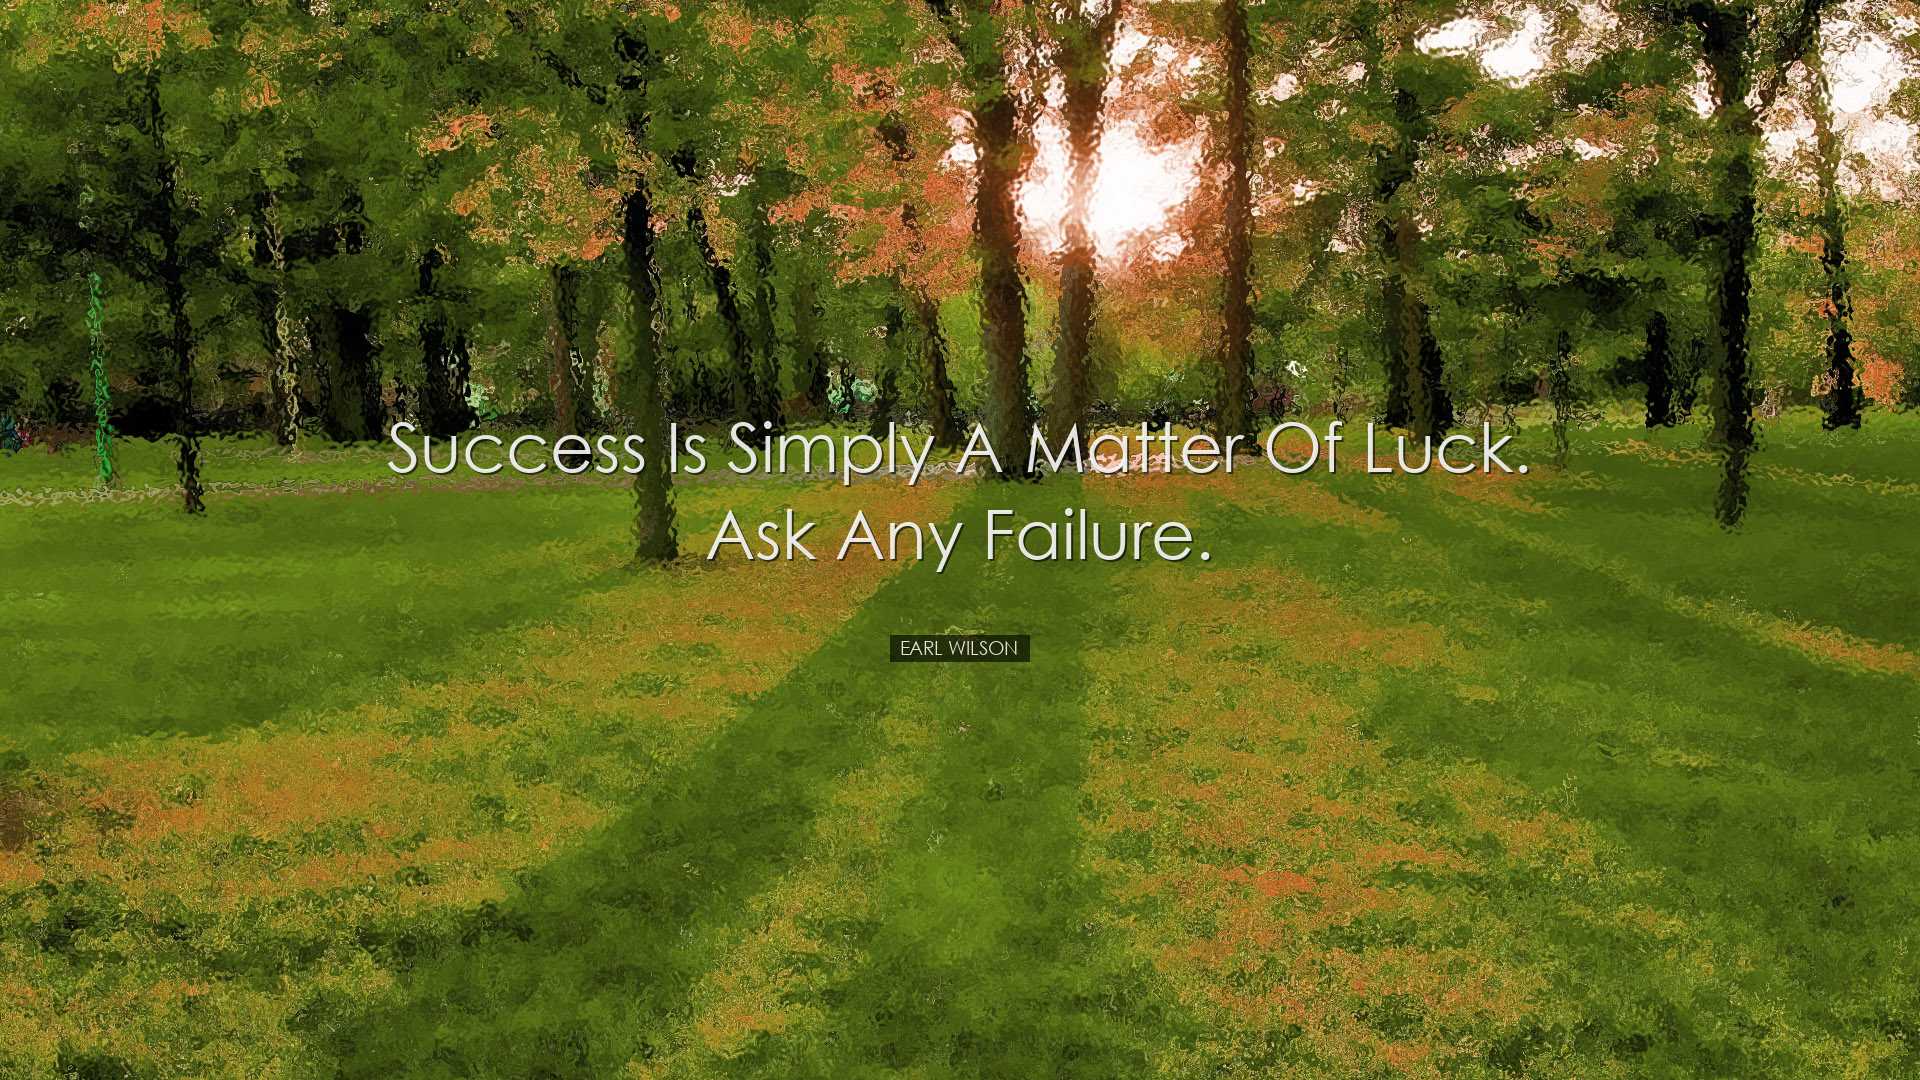 Success is simply a matter of luck. Ask any failure. - Earl Wilson